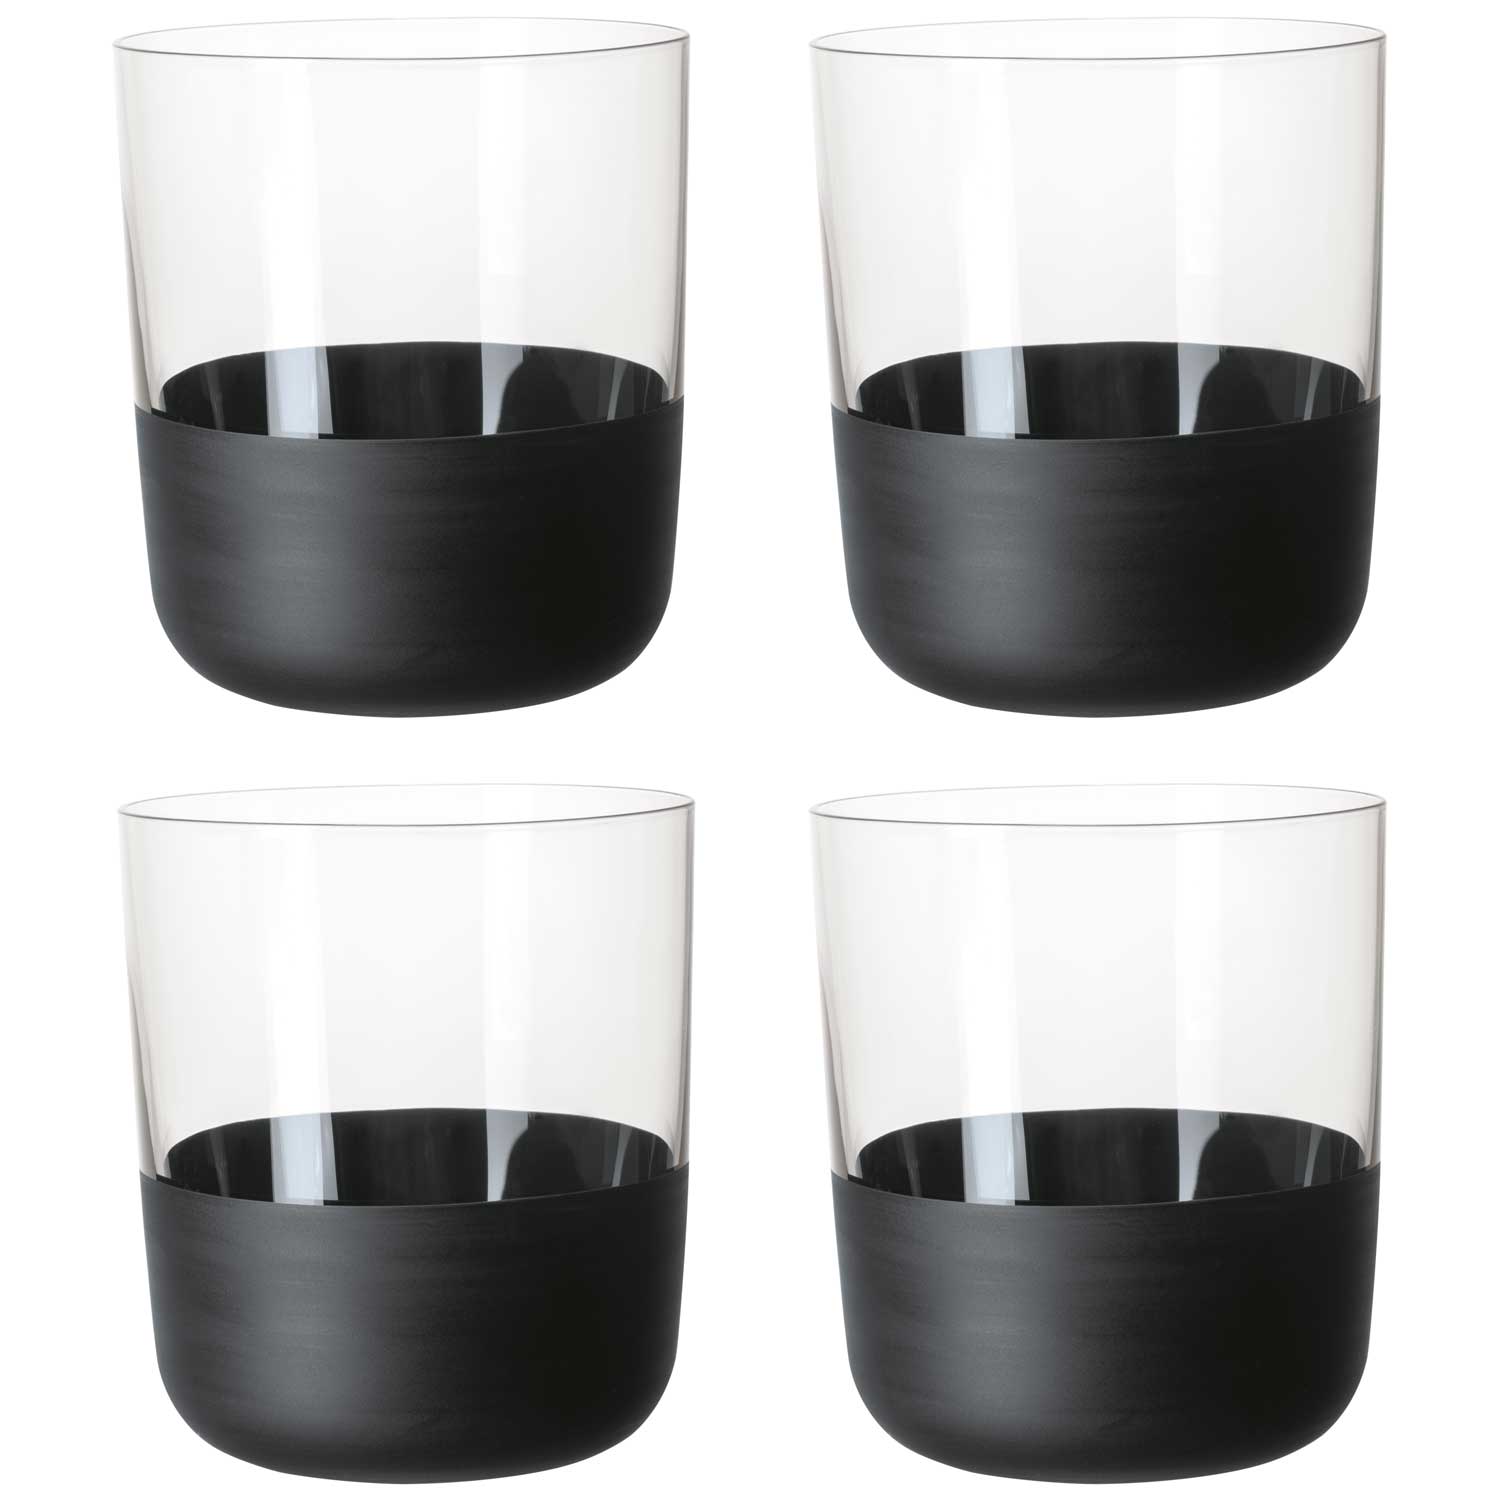 Rabbit Freezable Beer Glasses, 2 Count (Pack of 1), Black